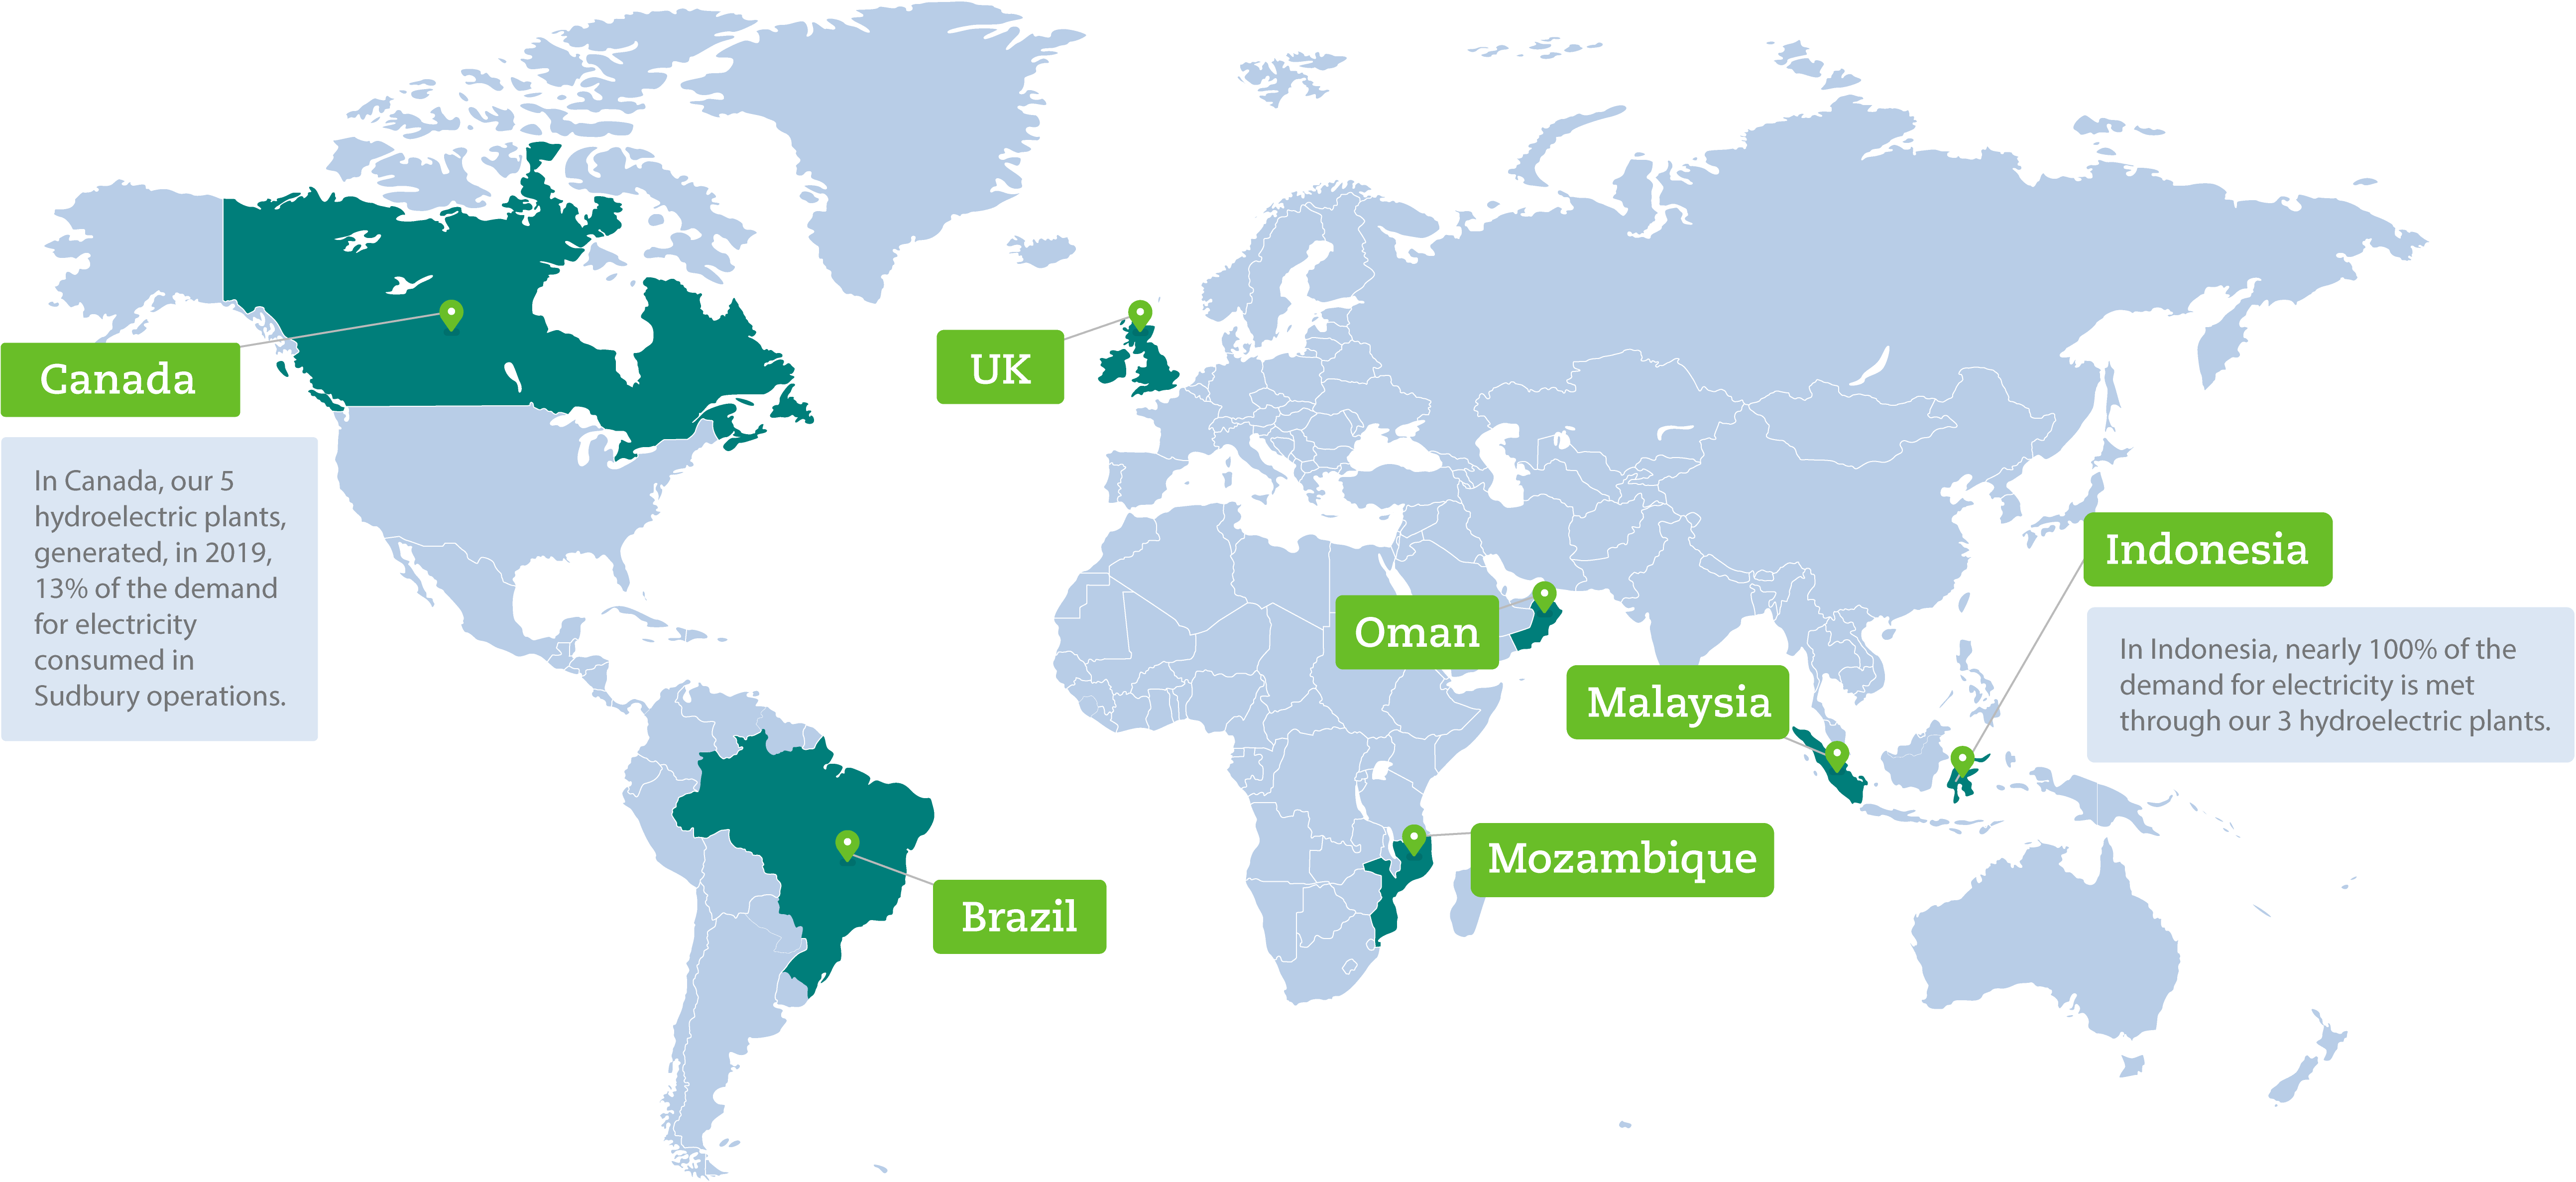 Map with information on Vale's energy generation in several countries